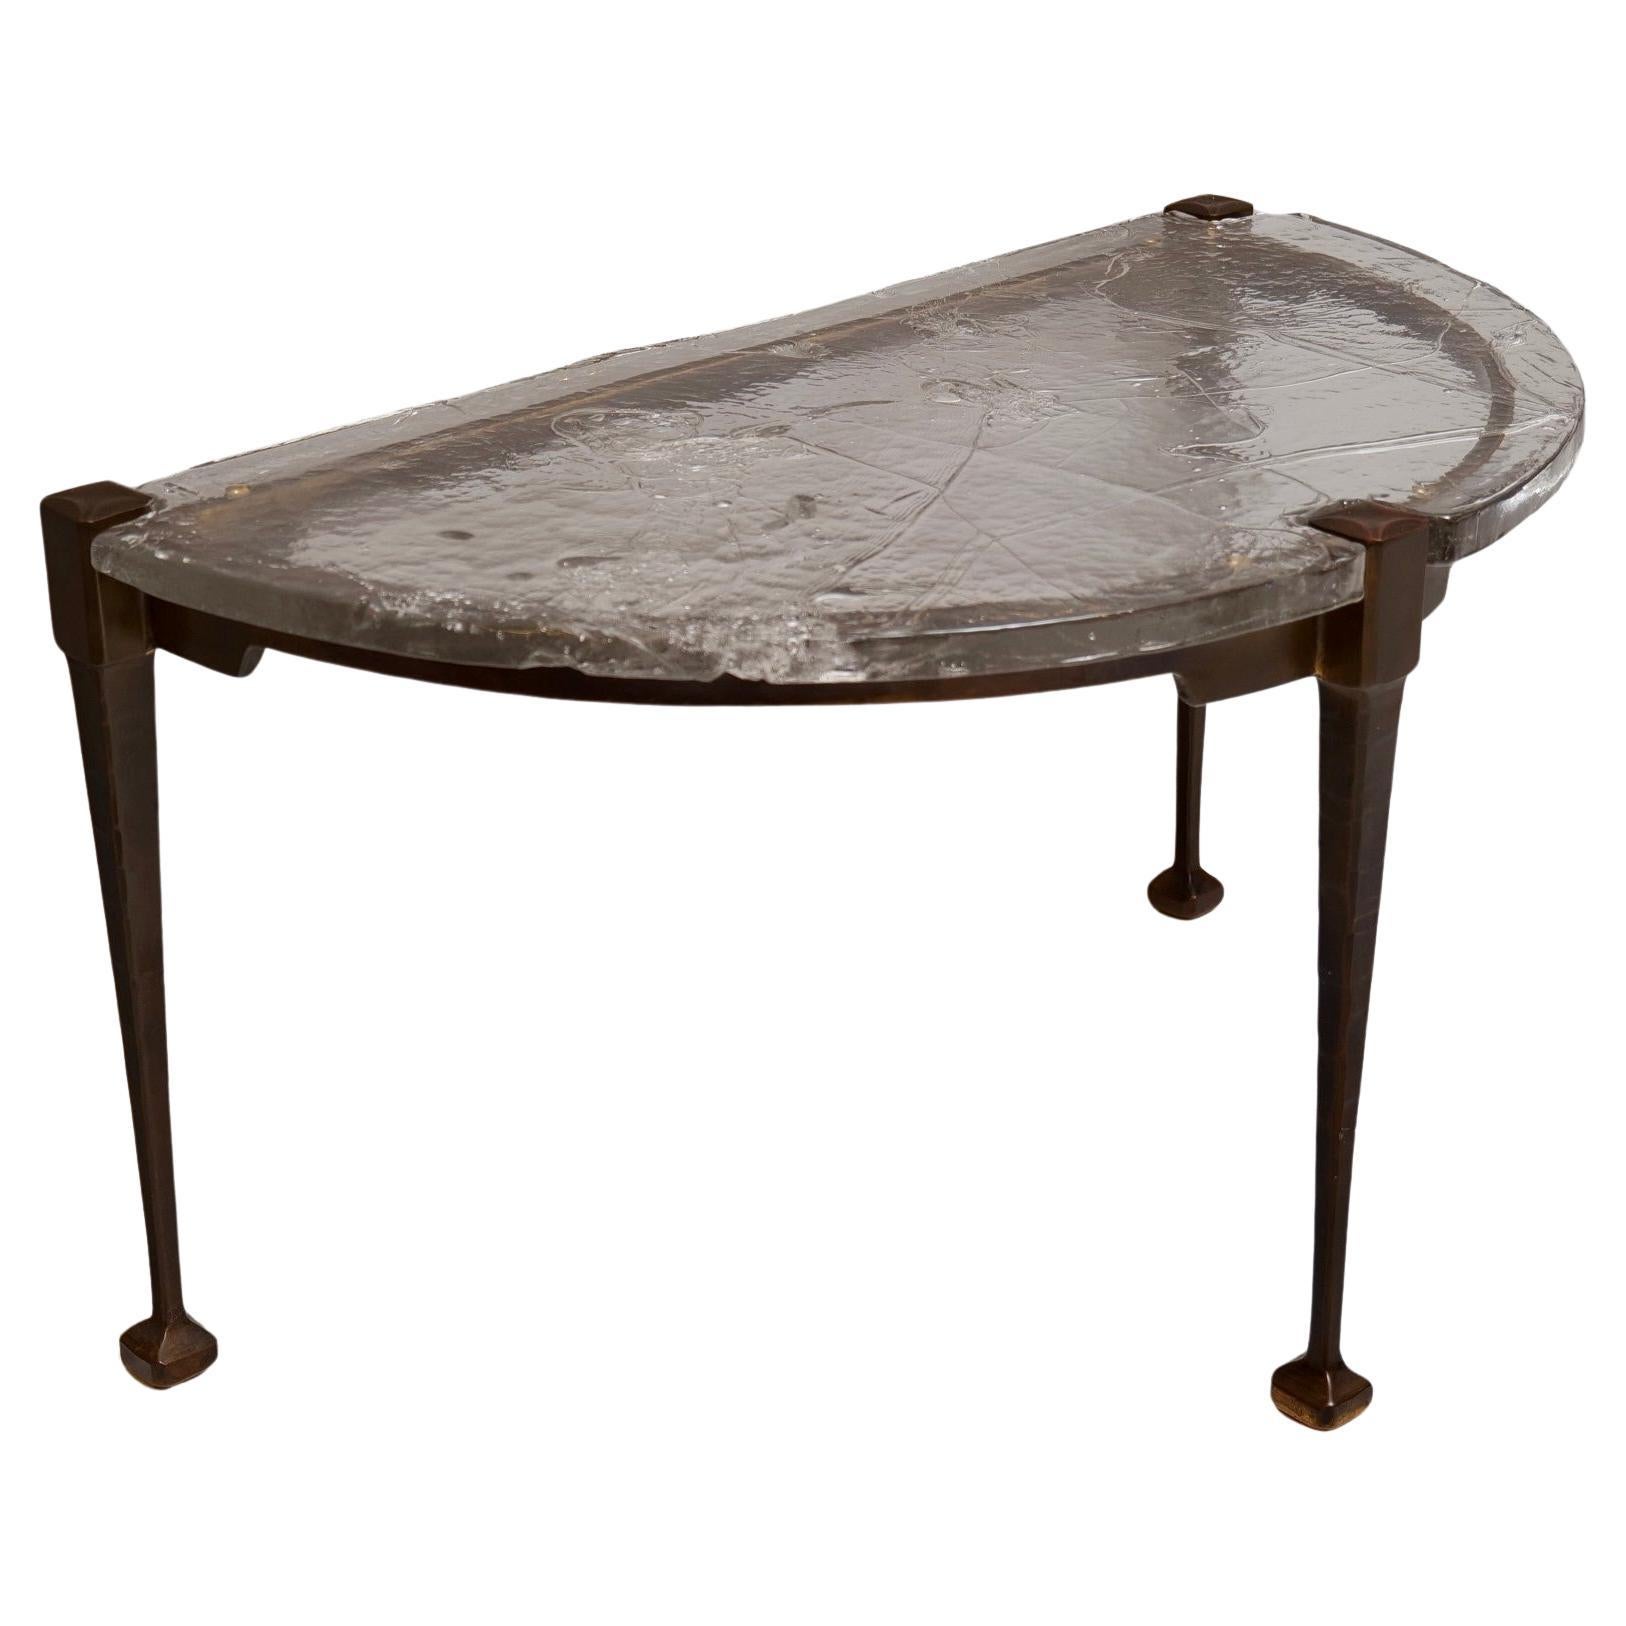 forged bronze & glass console table by Lothar Klute signed For Sale